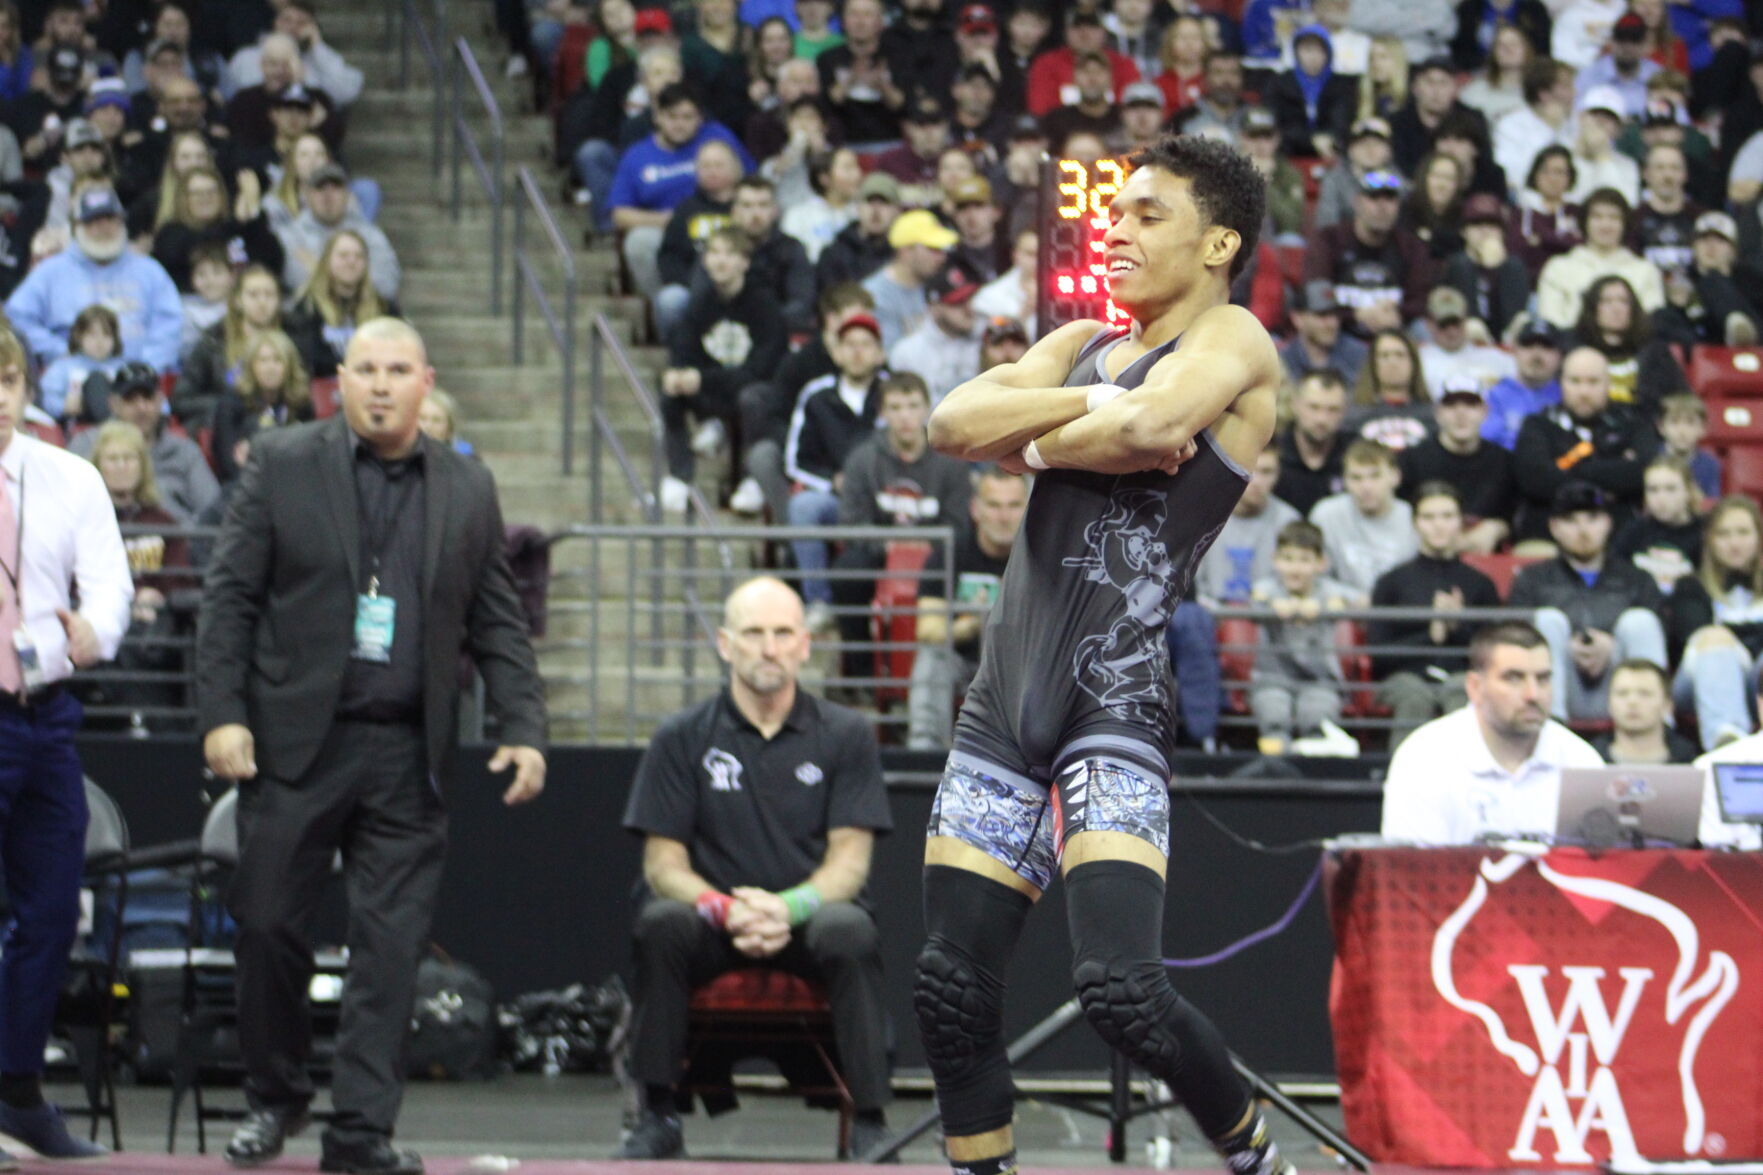 Co’ji Campbell makes history with third consecutive state wrestling championship in Kenosha County